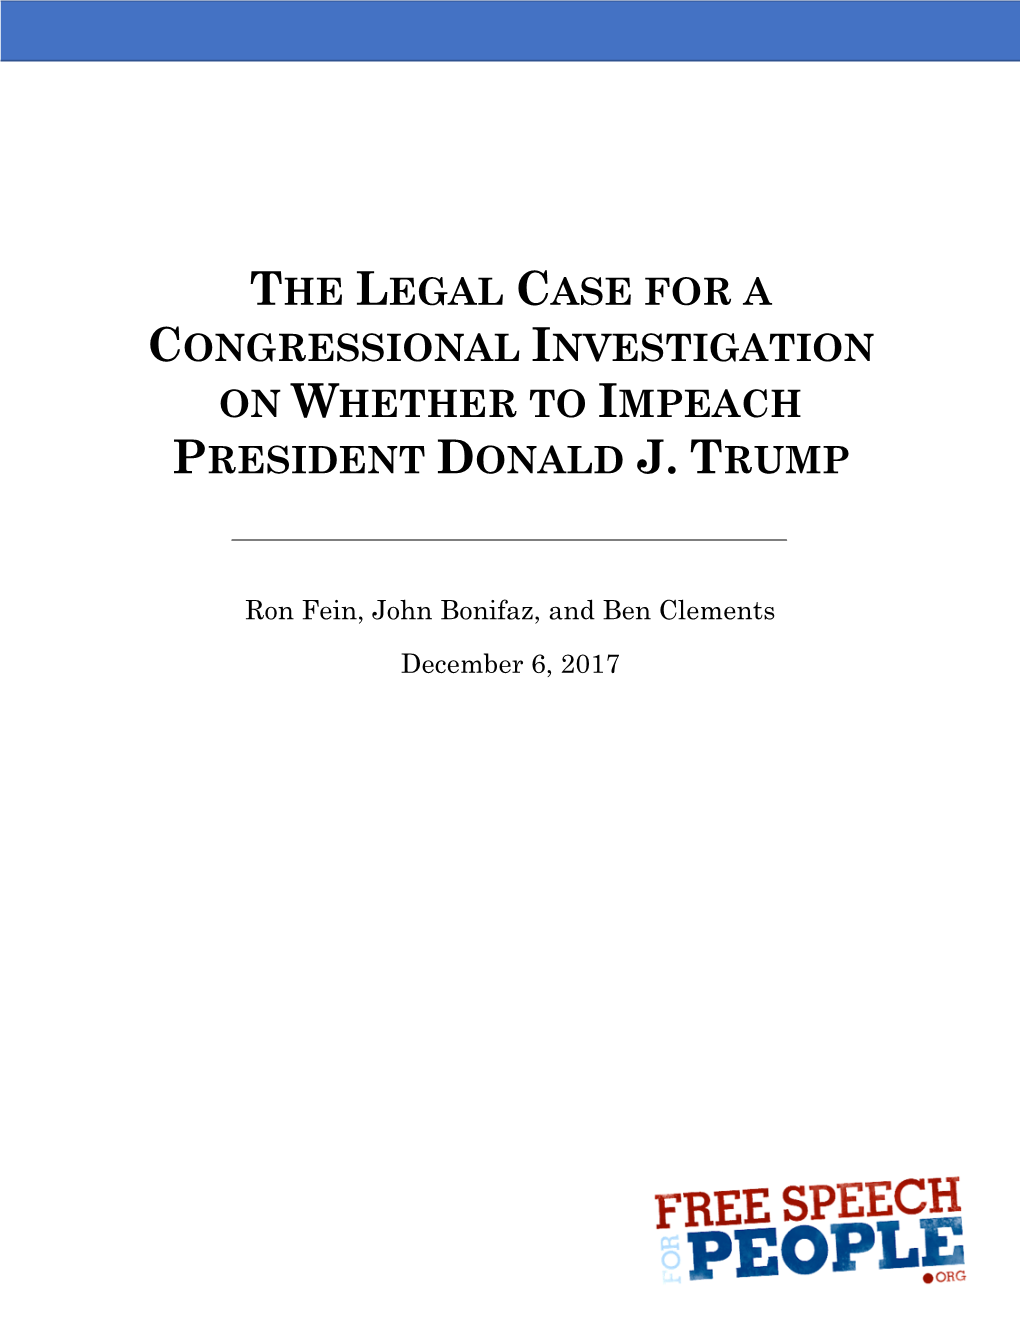 The Legal Case for a Congressional Investigation on Whether to Impeach President Donald J